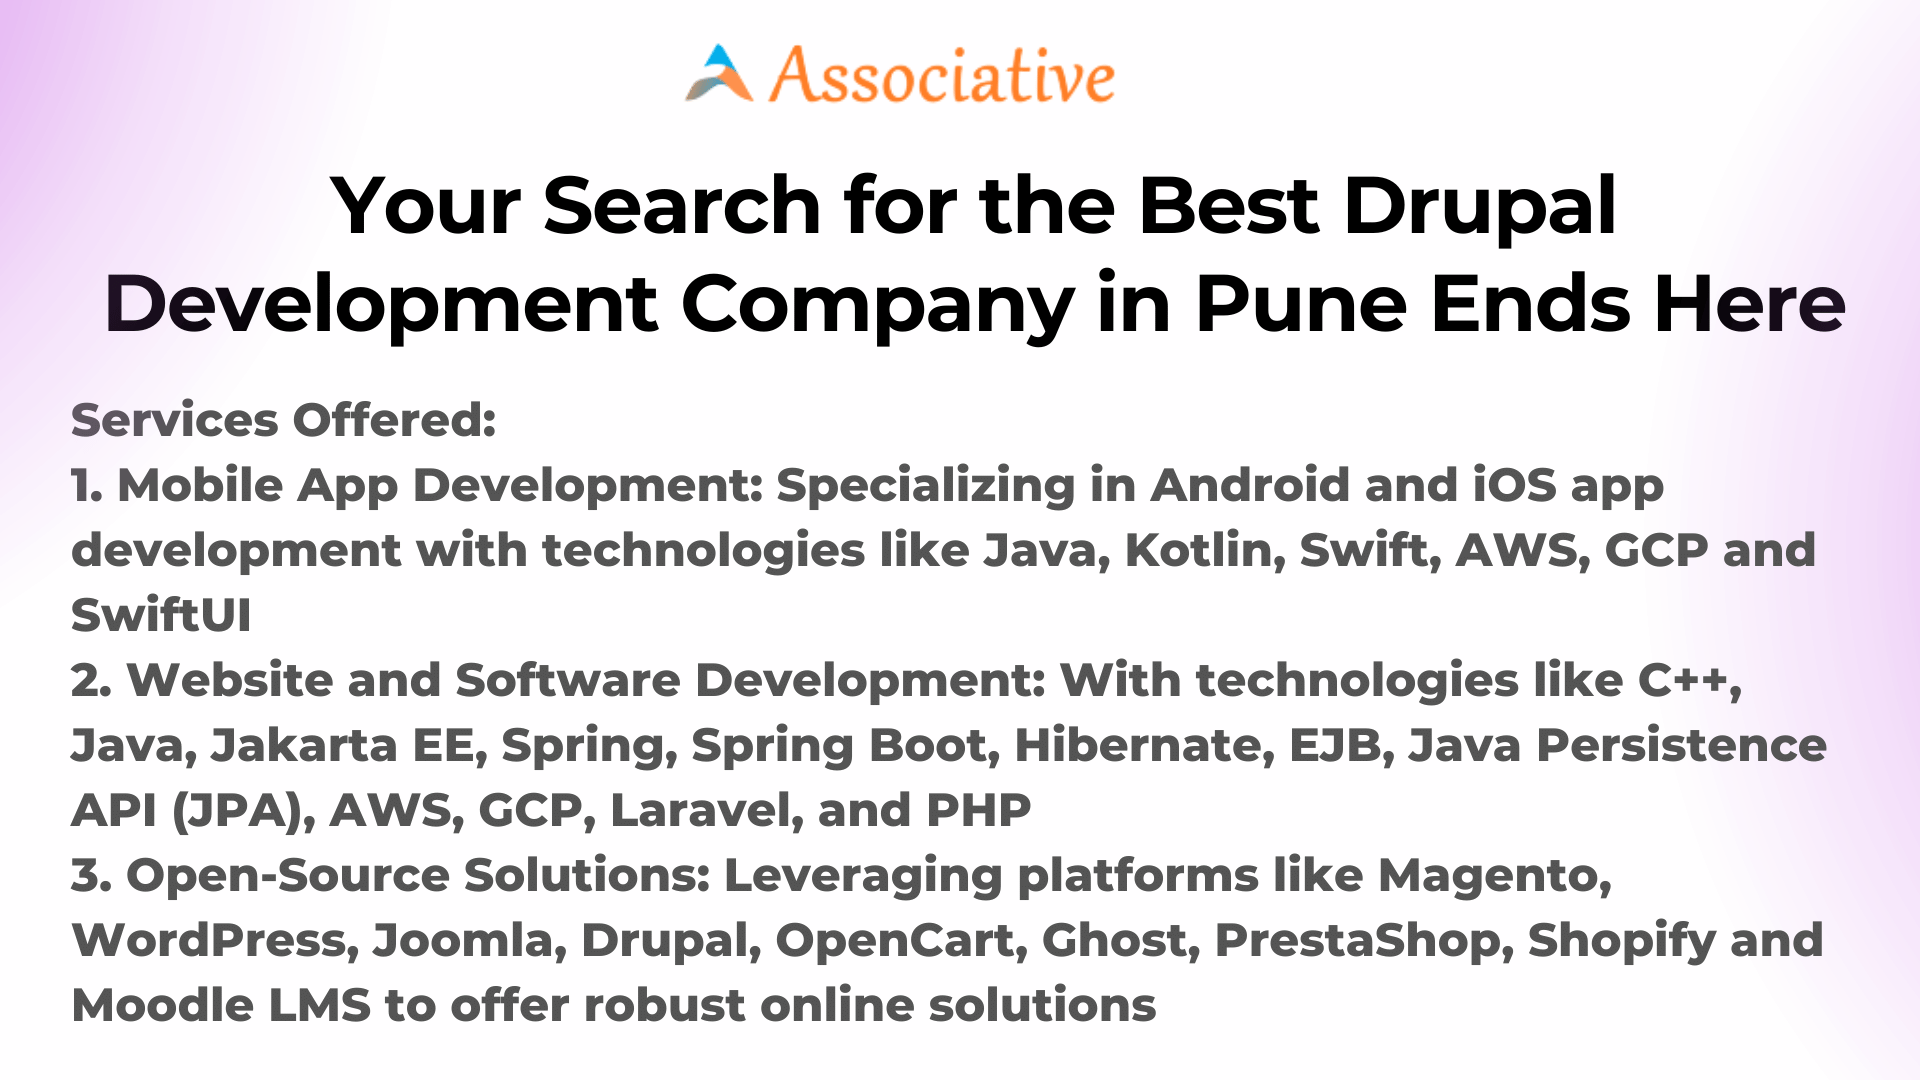 Your Search for the Best Drupal Development Company in Pune Ends Here